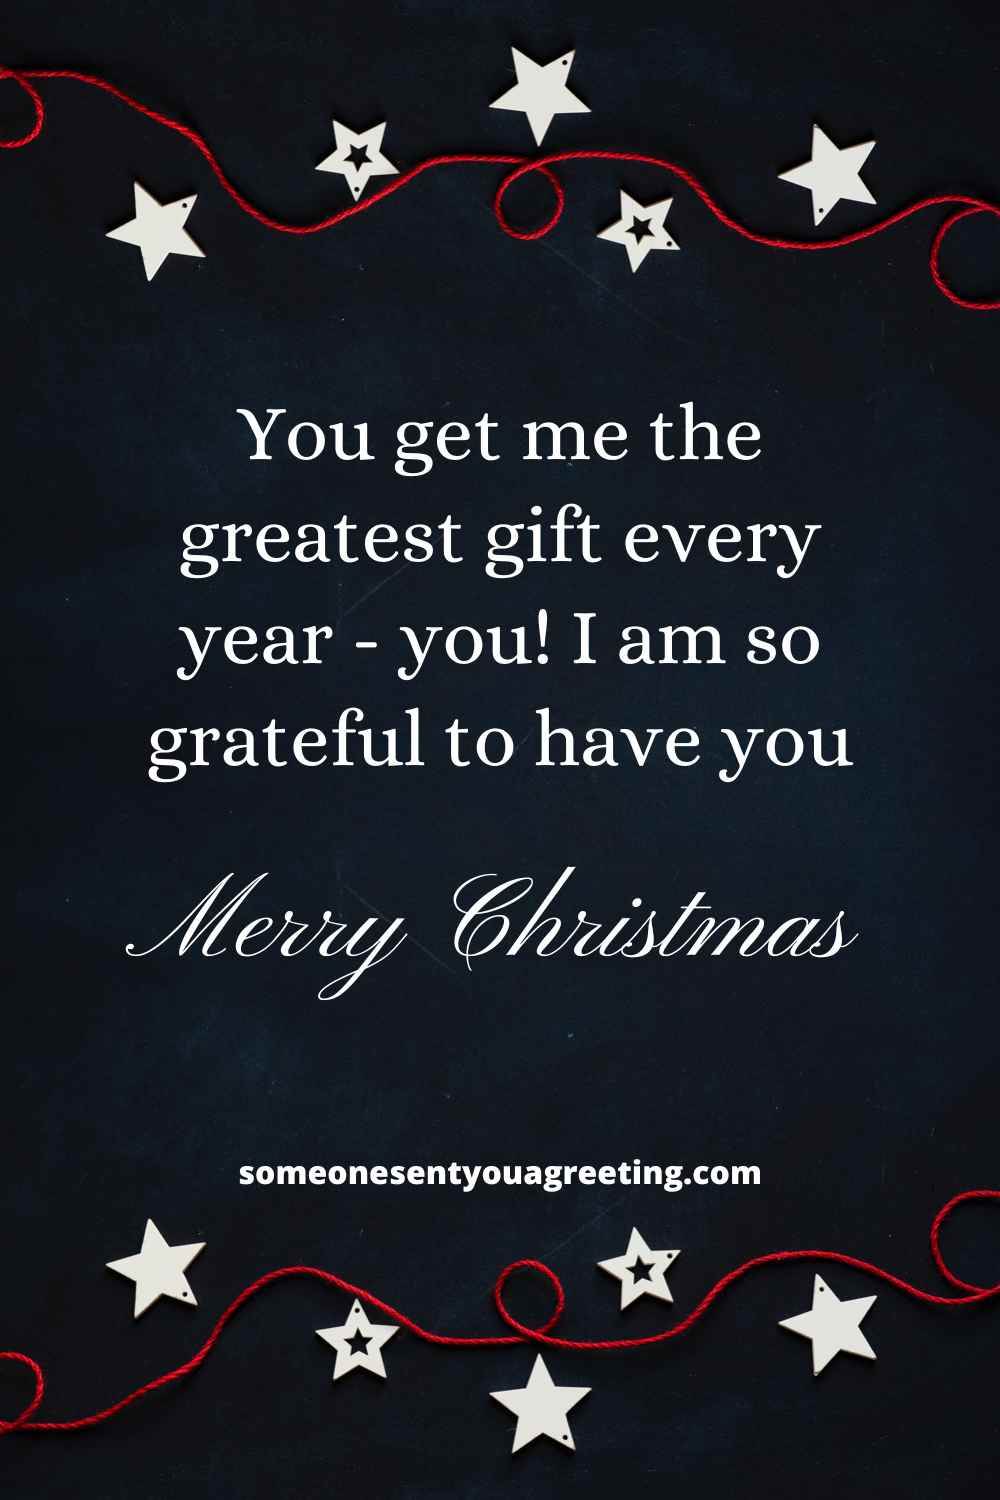 sweet Christmas message for loved one